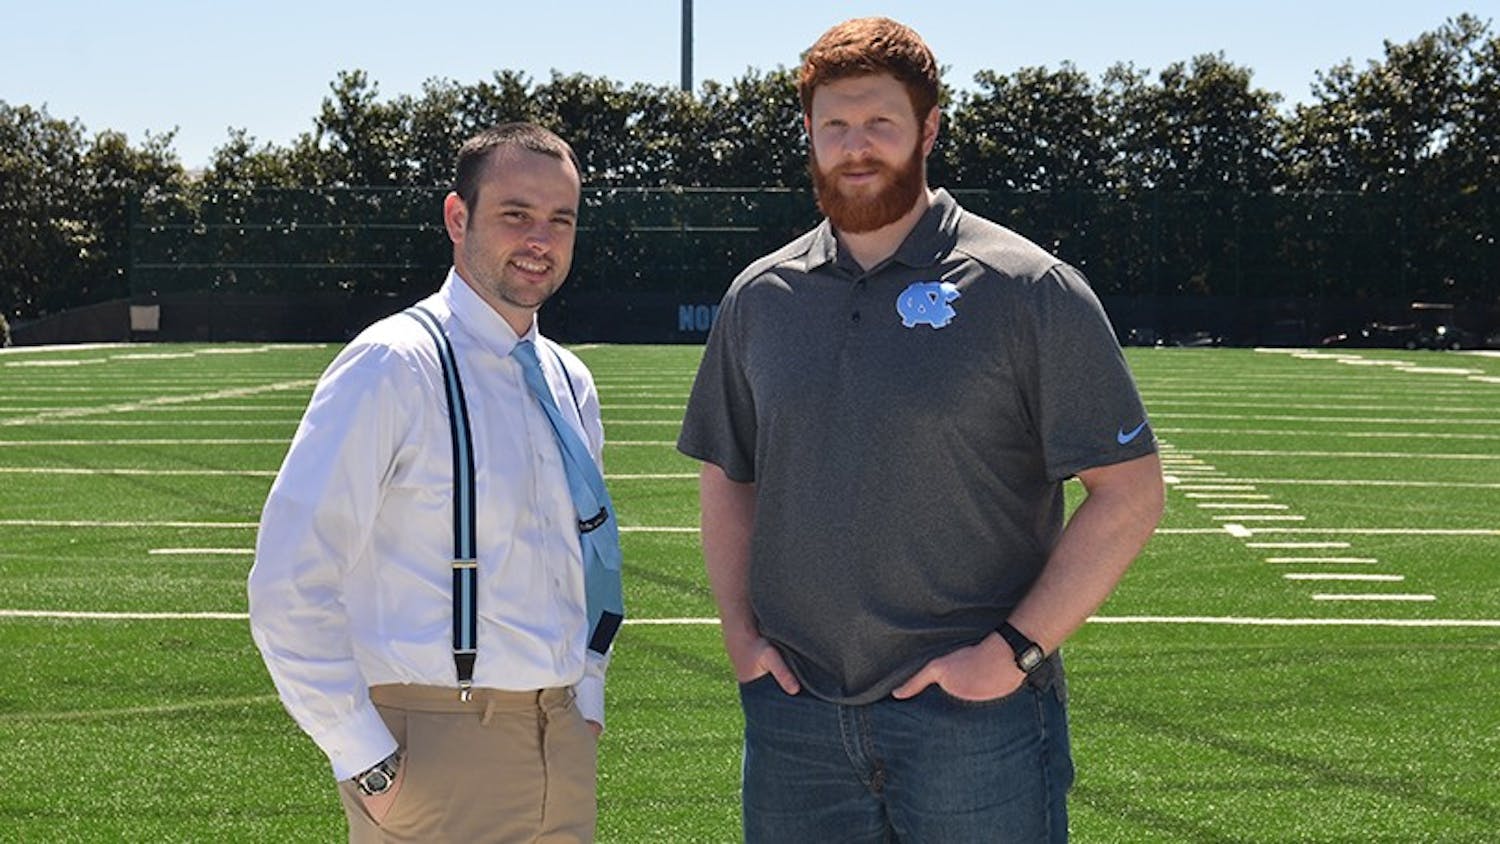 UNC Journalism school professor Stephen Timothy and and Offensive Line coach Ryan McKee have drafted a proposal suggesting that student athletes take 6 credit hours of courses instead of 12. McKee believes that once non practice time is included, being a student athlete is "more than a full time job". To their knowledge, this proposal is the first of its kind.